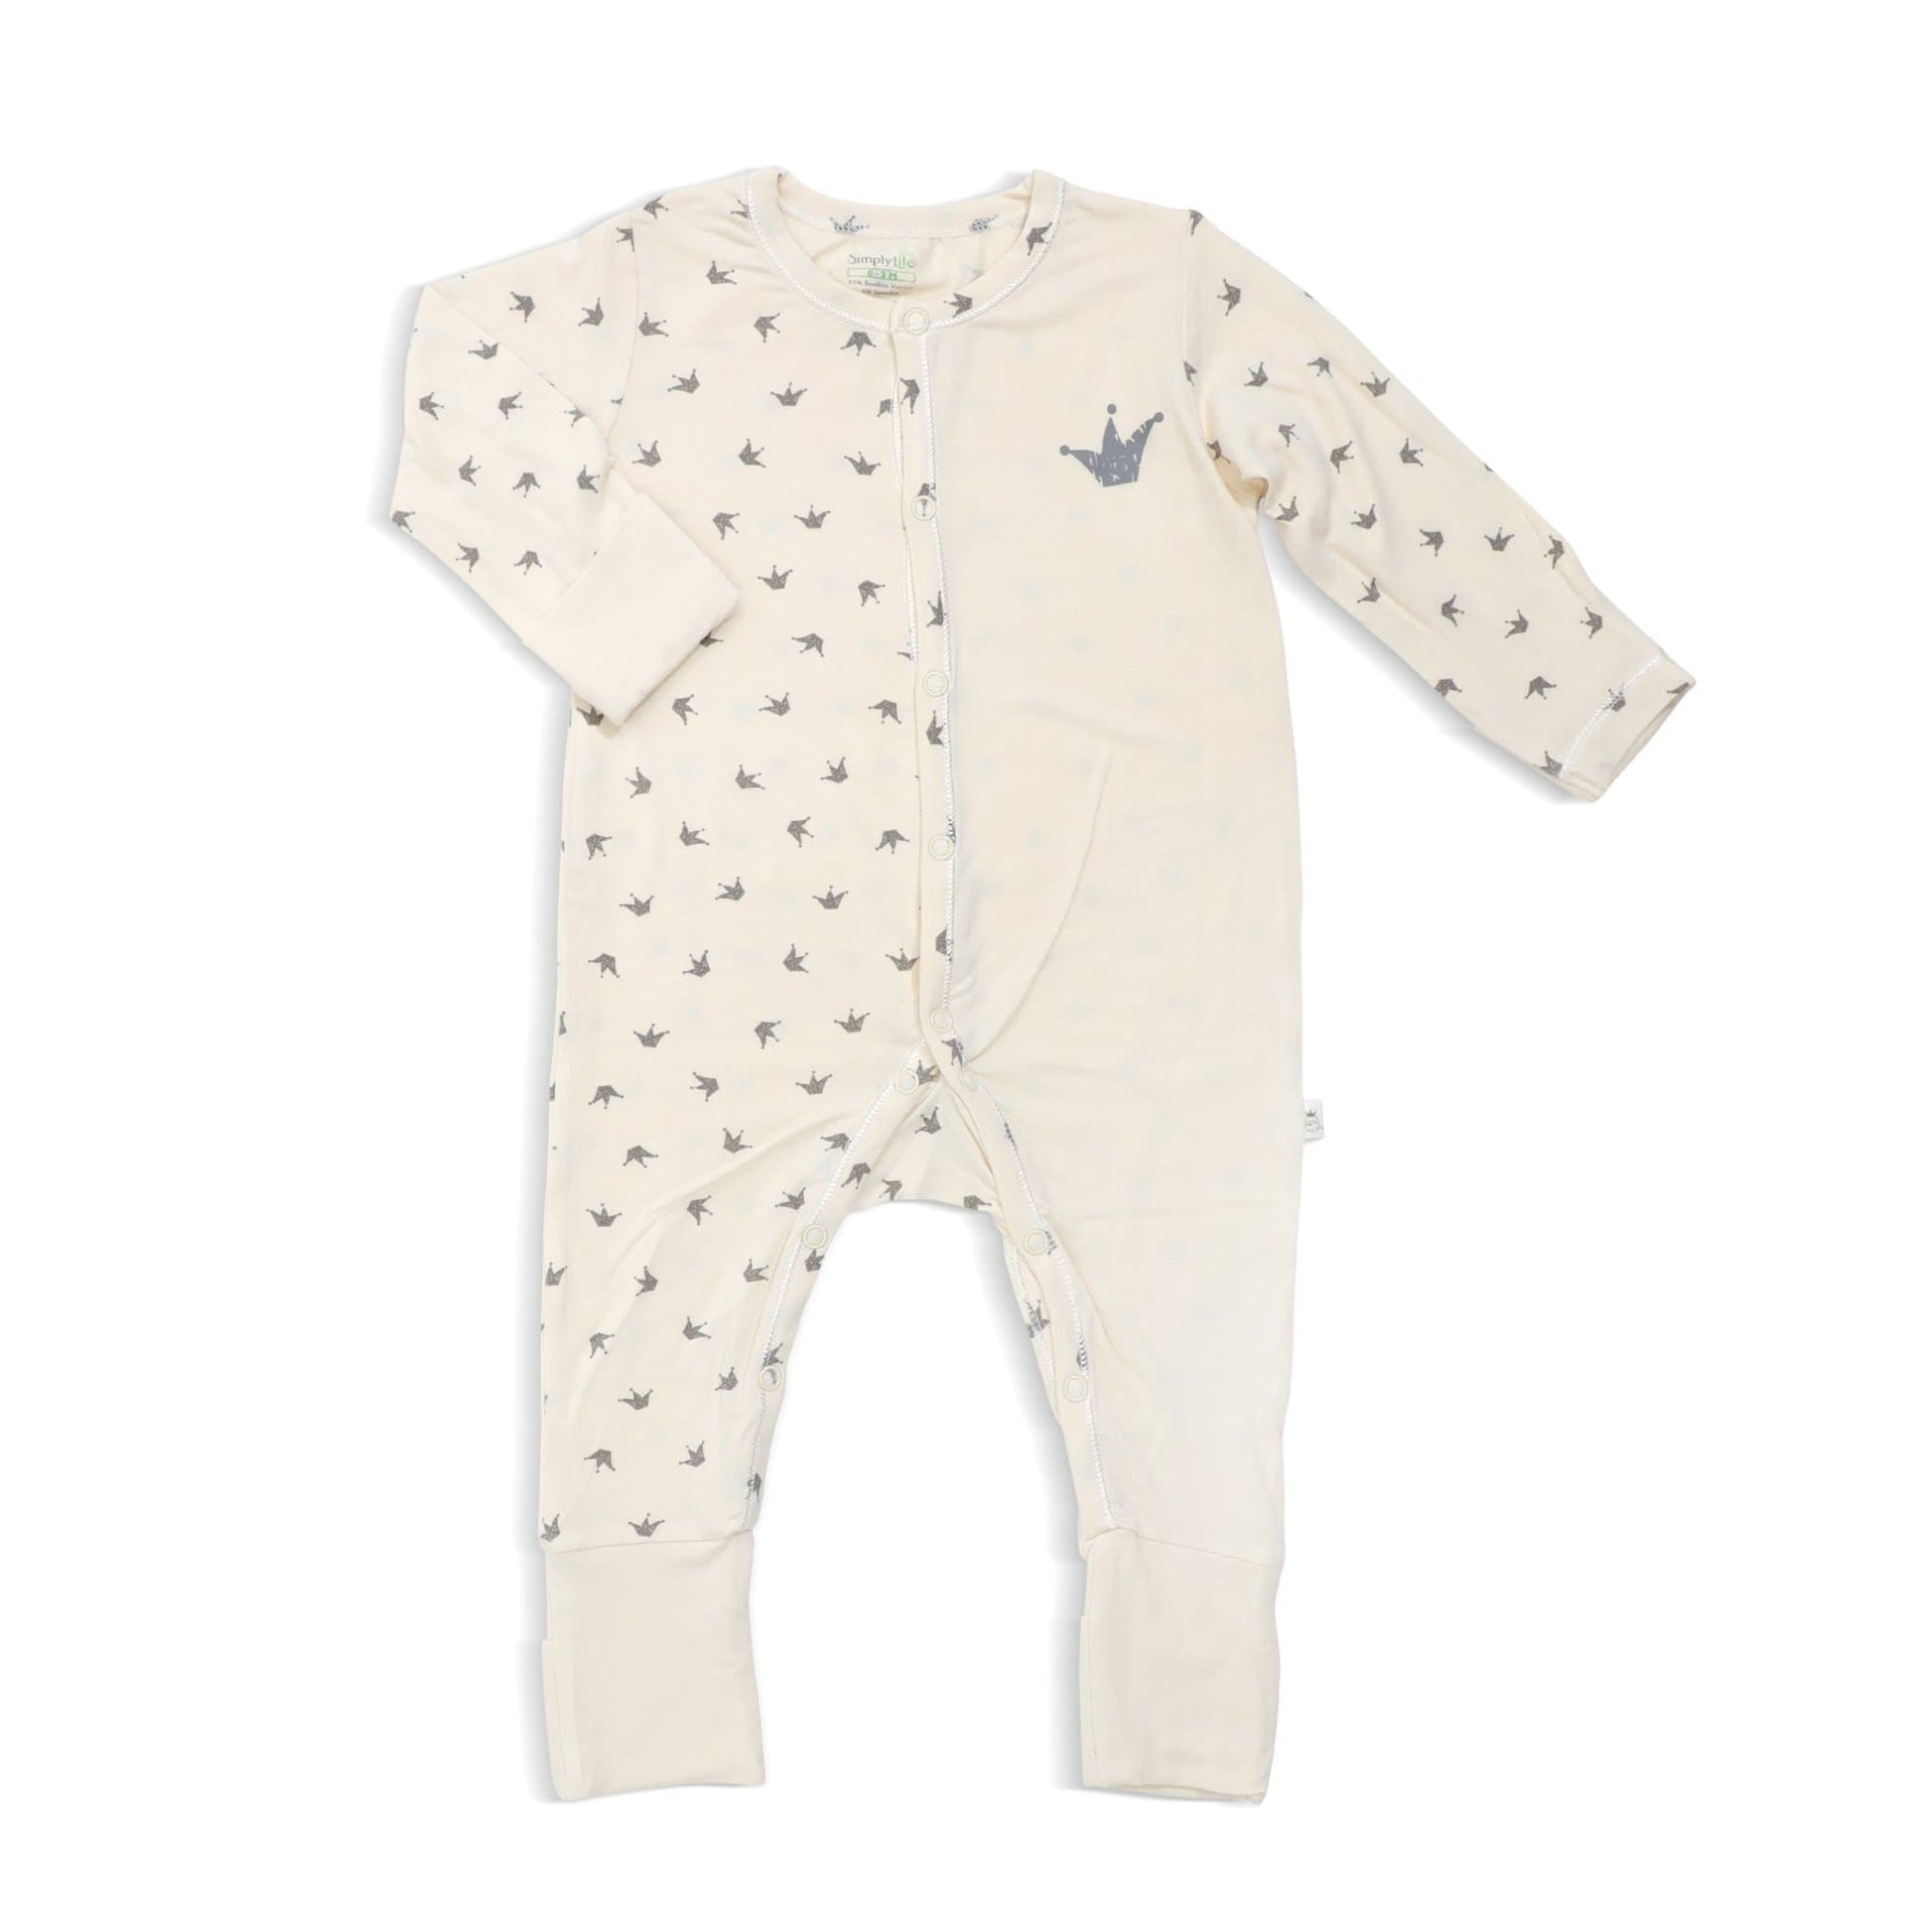 Royale - Long-sleeved Button Sleepsuit with Folded Mittens & Footie by simplylifebaby